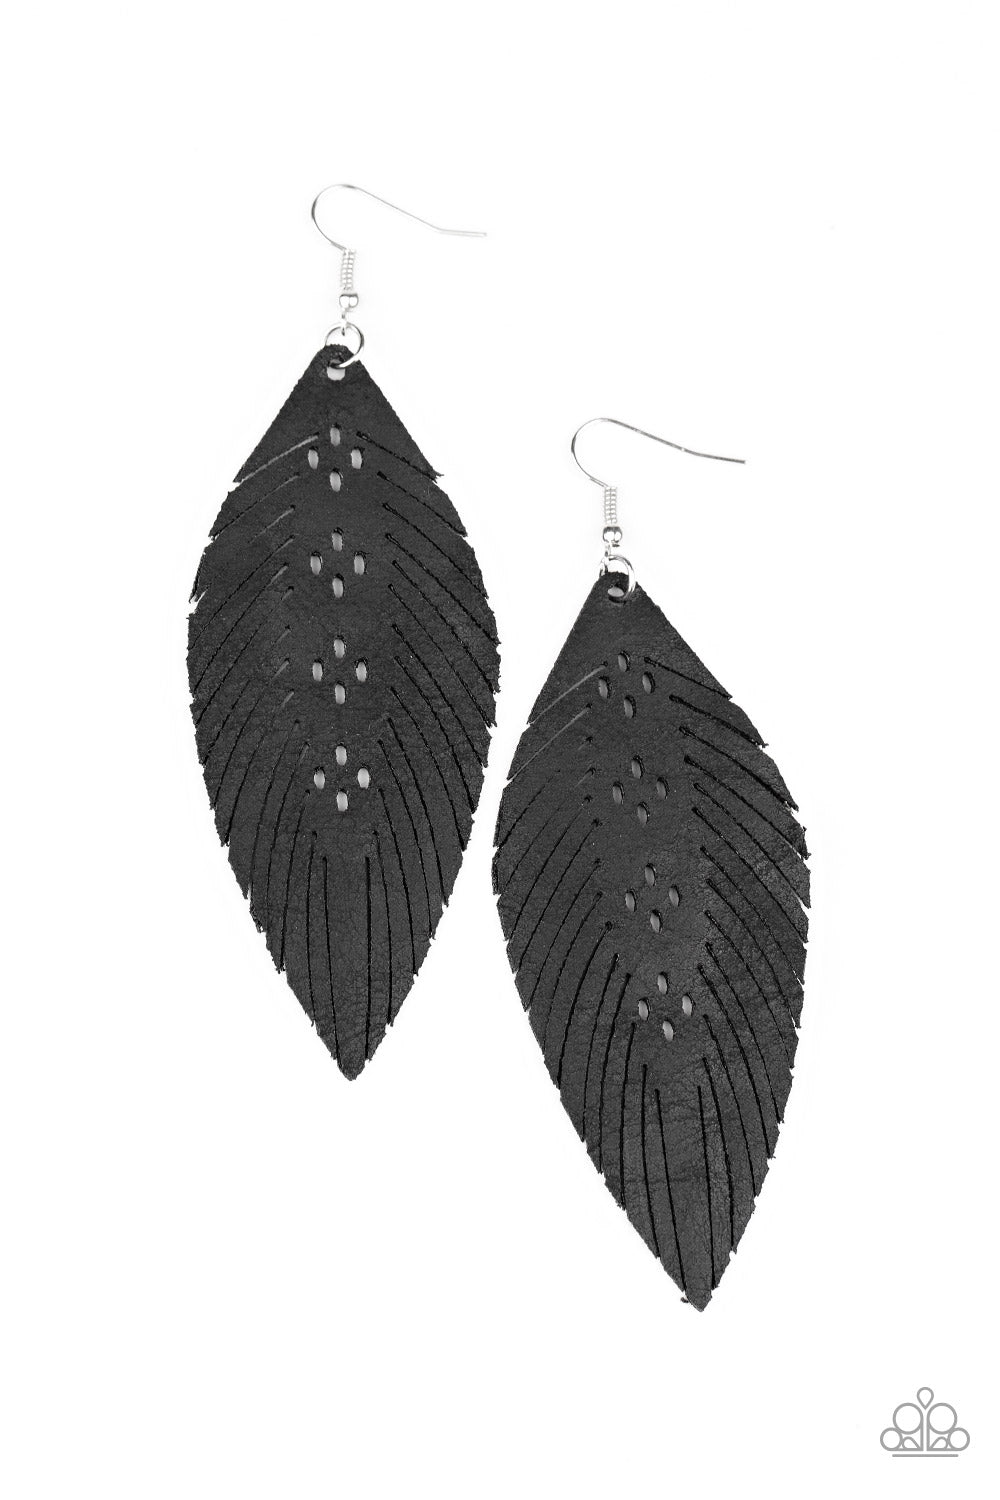 &lt;P&gt;Spliced and stenciled in whimsical detail, a distressed black leather frame is cut into a feathery frame for a free-spirited finish. Earring attaches to a standard fishhook fitting.&lt;/P&gt;  

&lt;P&gt; &lt;I&gt;  Sold as one pair of earrings. &lt;/I&gt;  &lt;/P&gt;


&lt;img src=\&quot;https://d9b54x484lq62.cloudfront.net/paparazzi/shopping/images/517_tag150x115_1.png\&quot; alt=\&quot;New Kit\&quot; align=\&quot;middle\&quot; height=\&quot;50\&quot; width=\&quot;50\&quot;/&gt;